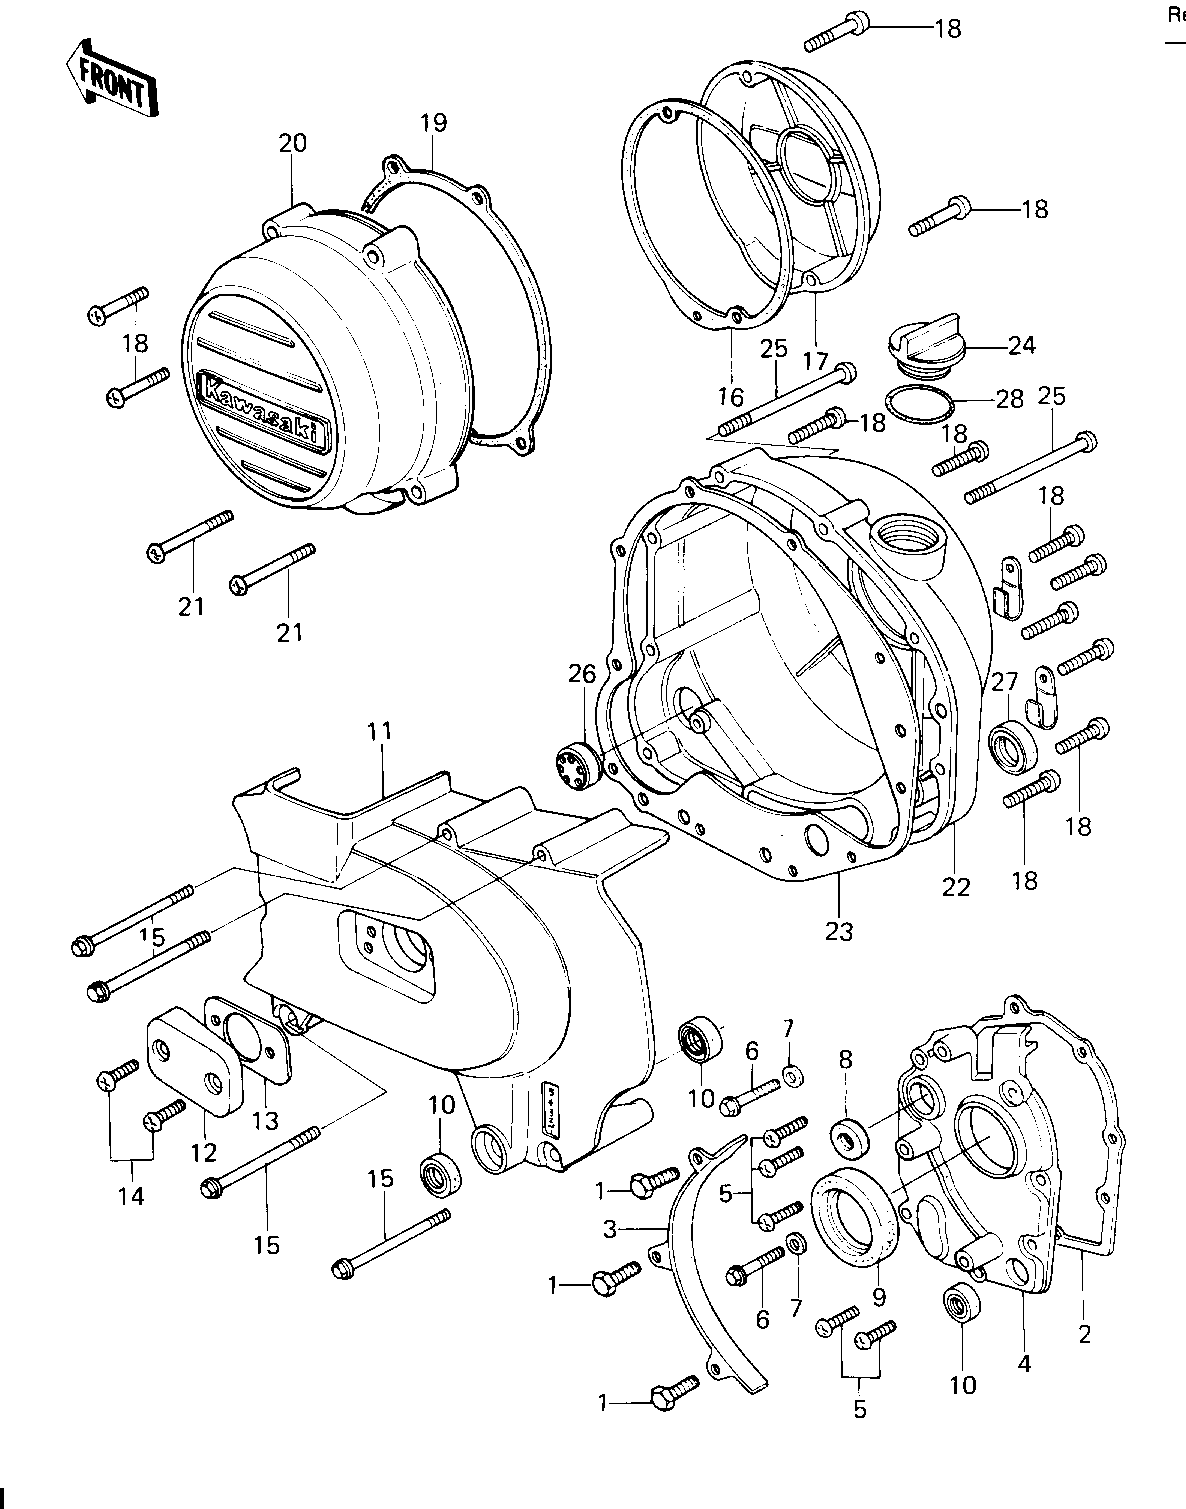 ENGINE COVERS